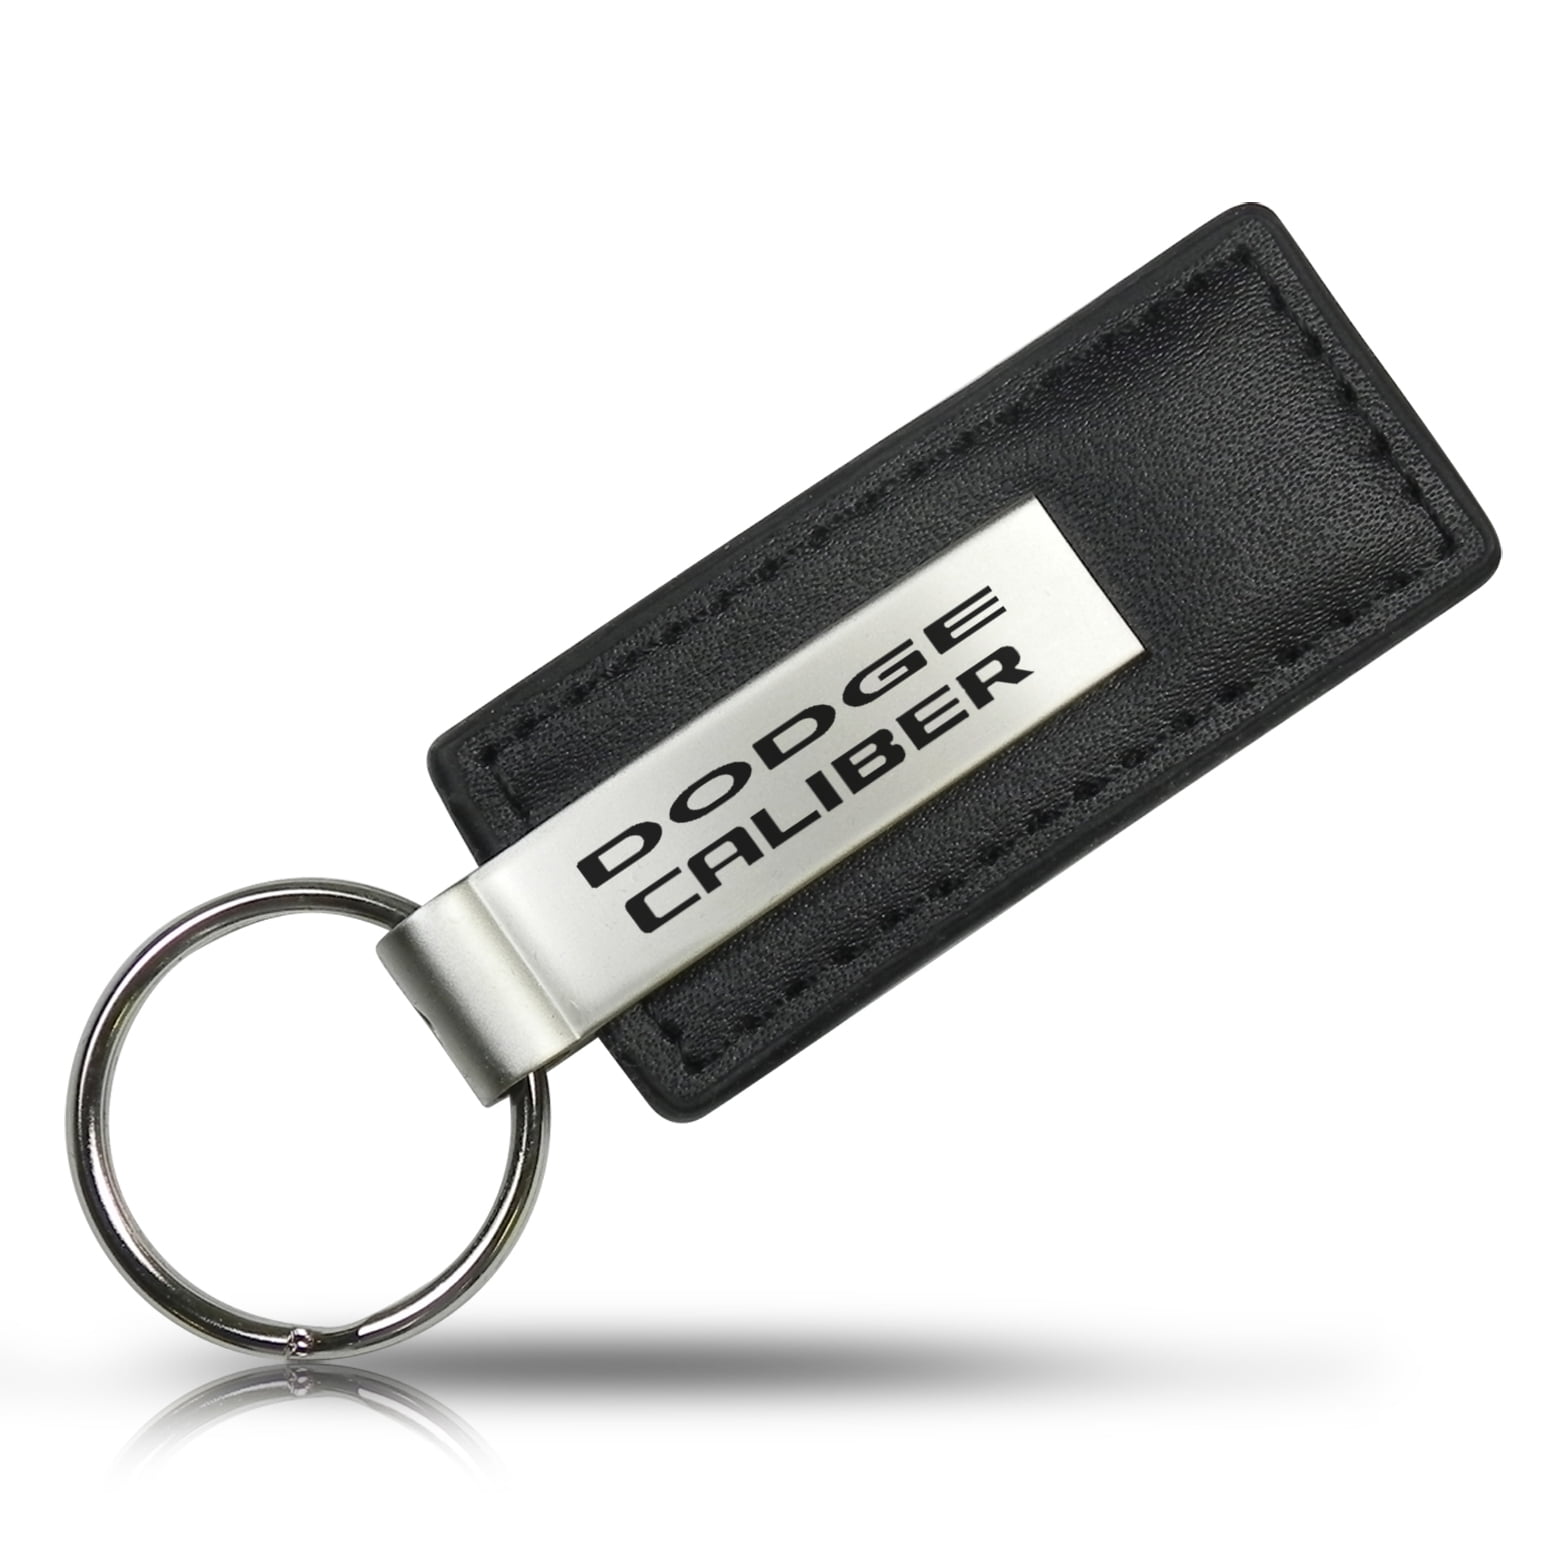 Dodge Stripes Key Ring Brown and Chrome Leather Rectangular Keychain 